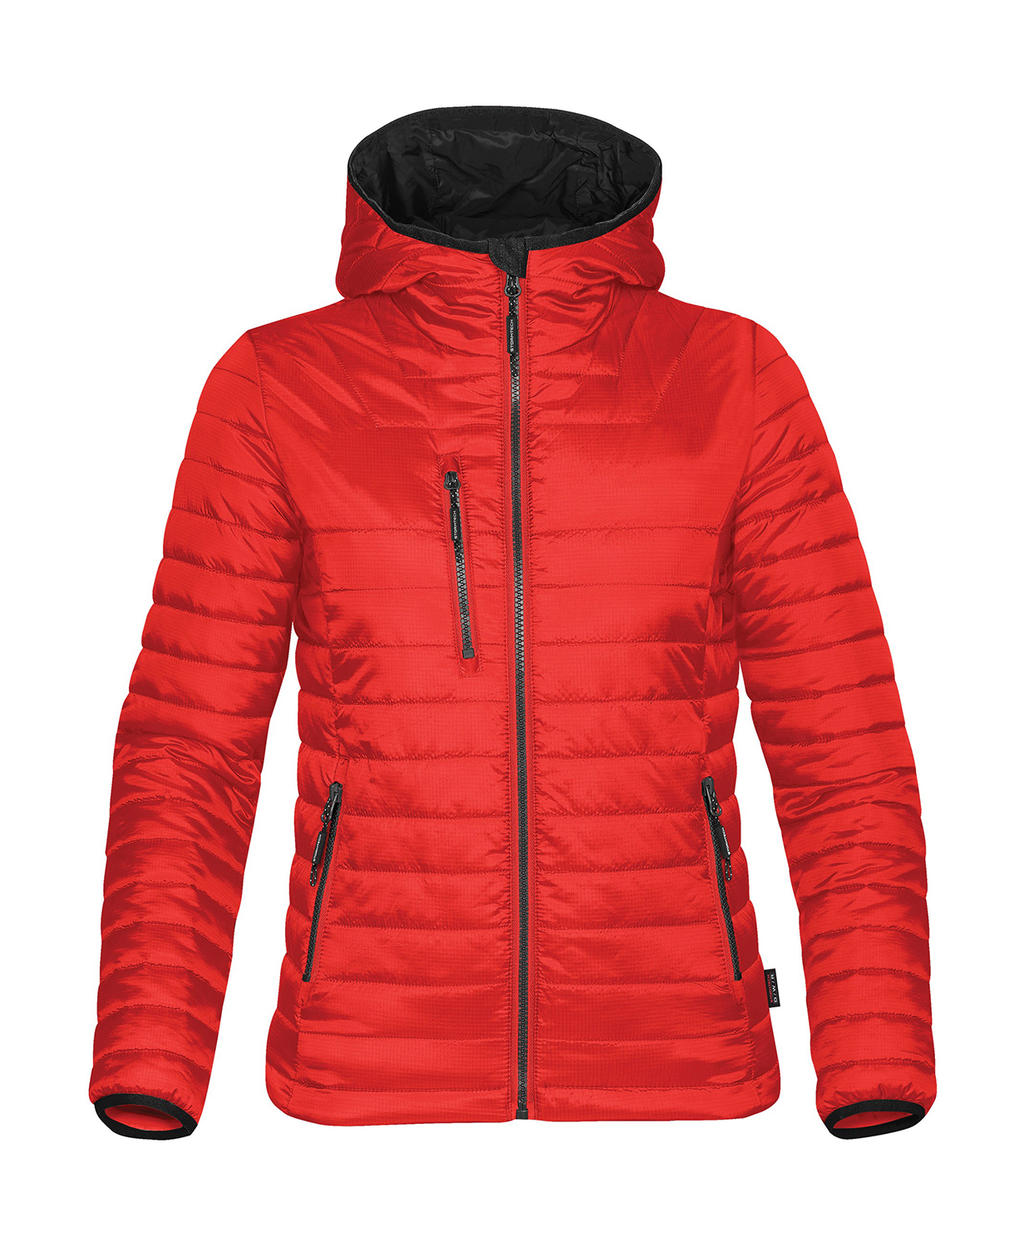  Womens Gravity Thermal Jacket in Farbe True Red/Black